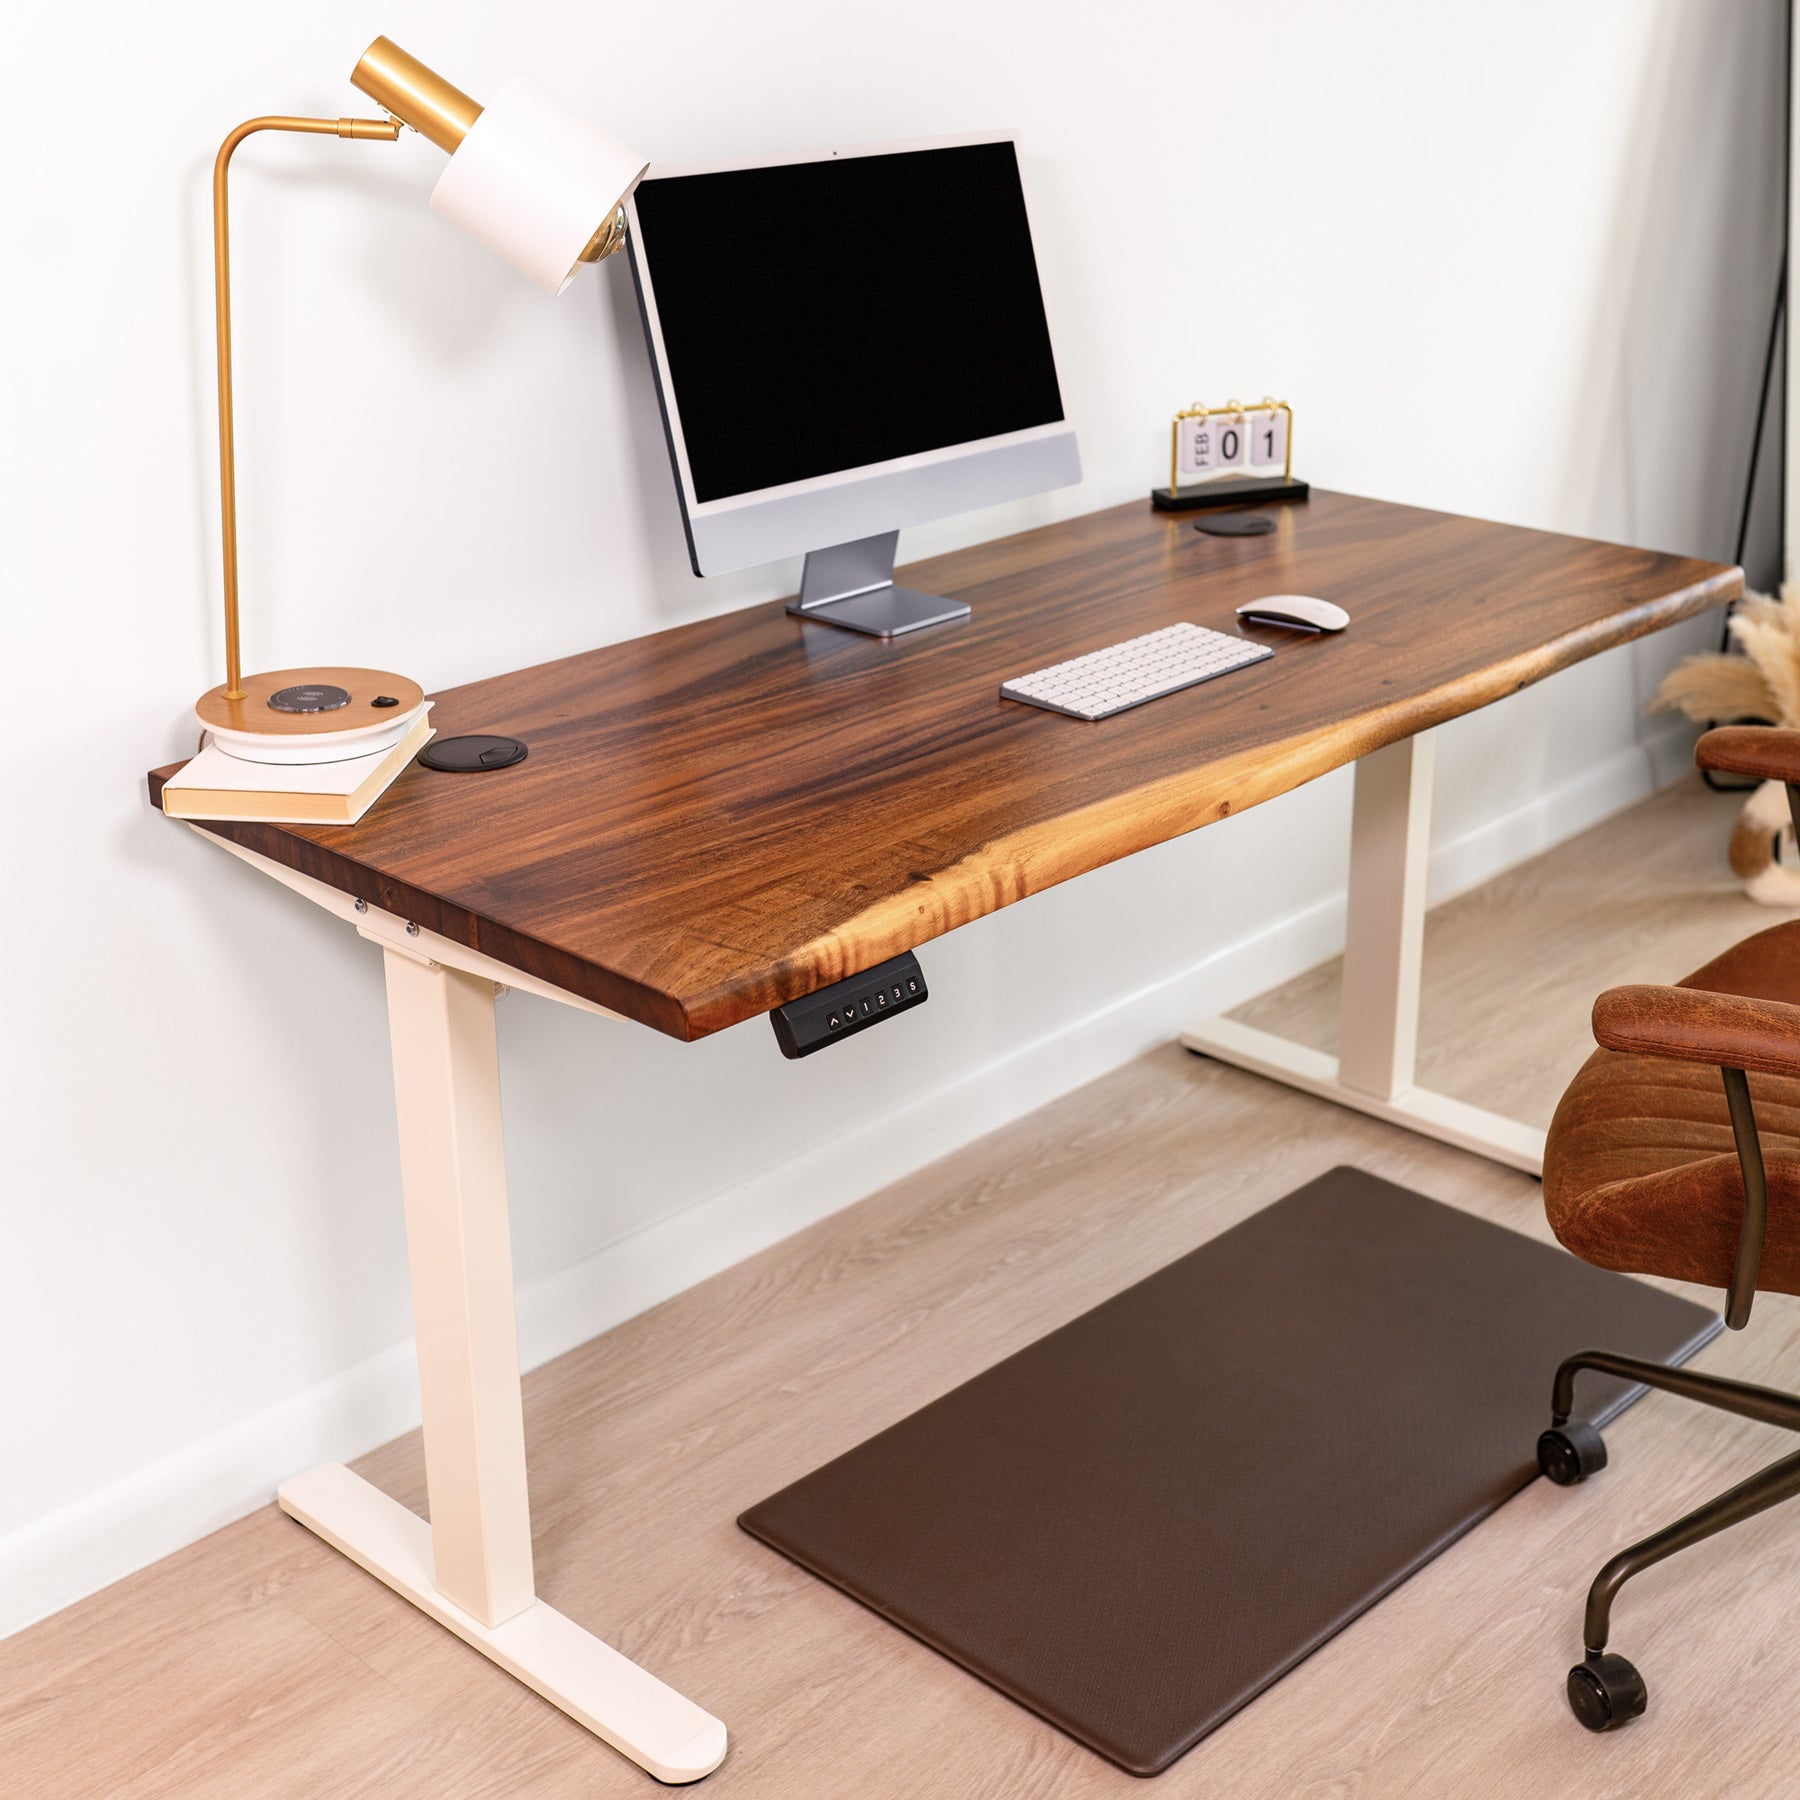 Solid wood adjustable height desk with white dual motor legs